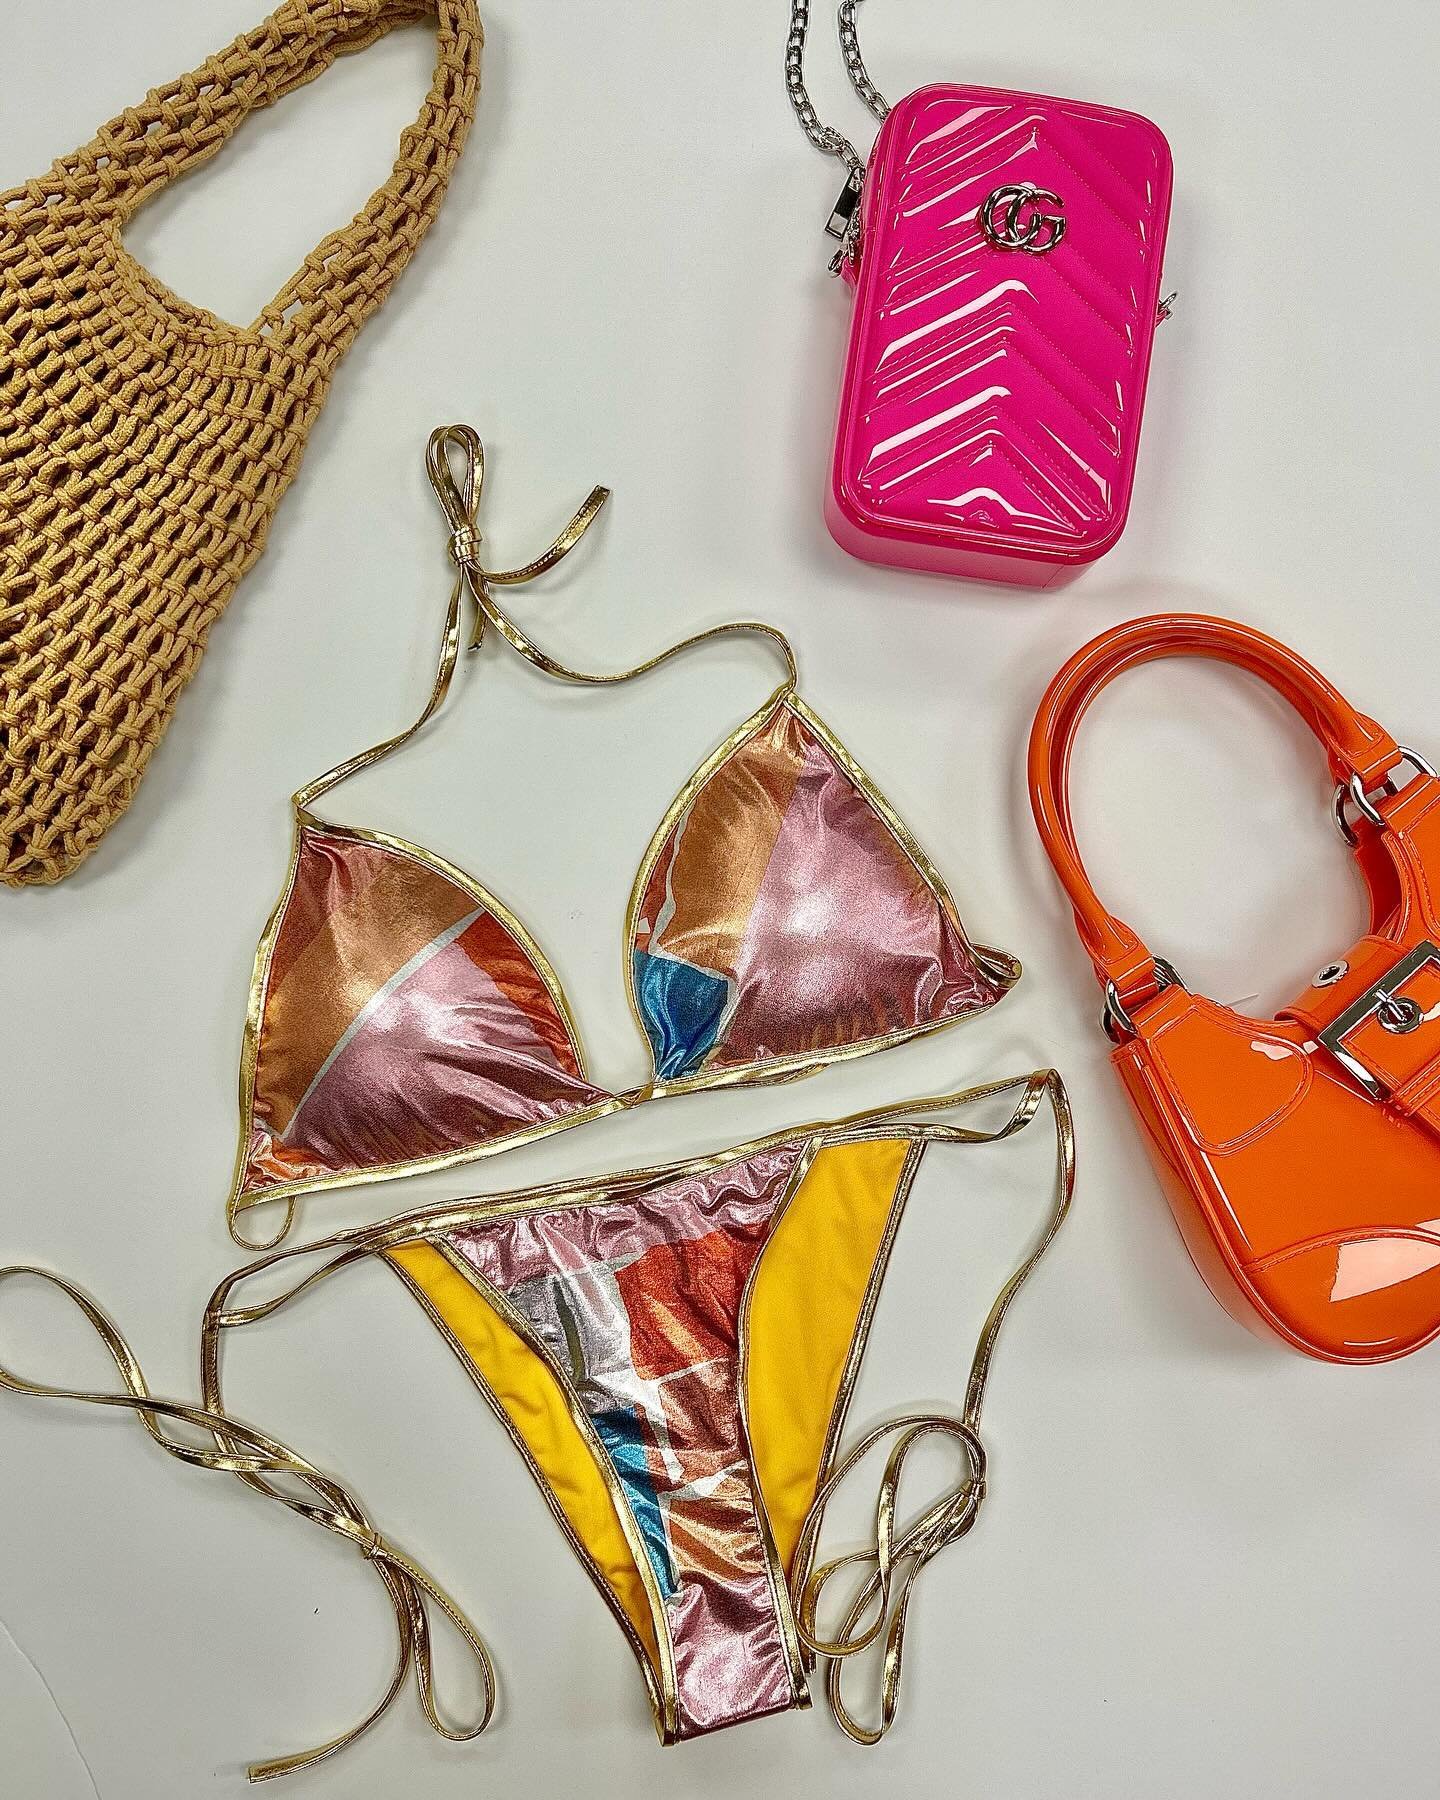 Sunset styles for your next vacay ✨☀️🌅 BOGO 1/2 SWIM going on in stores now! 

#madragstores